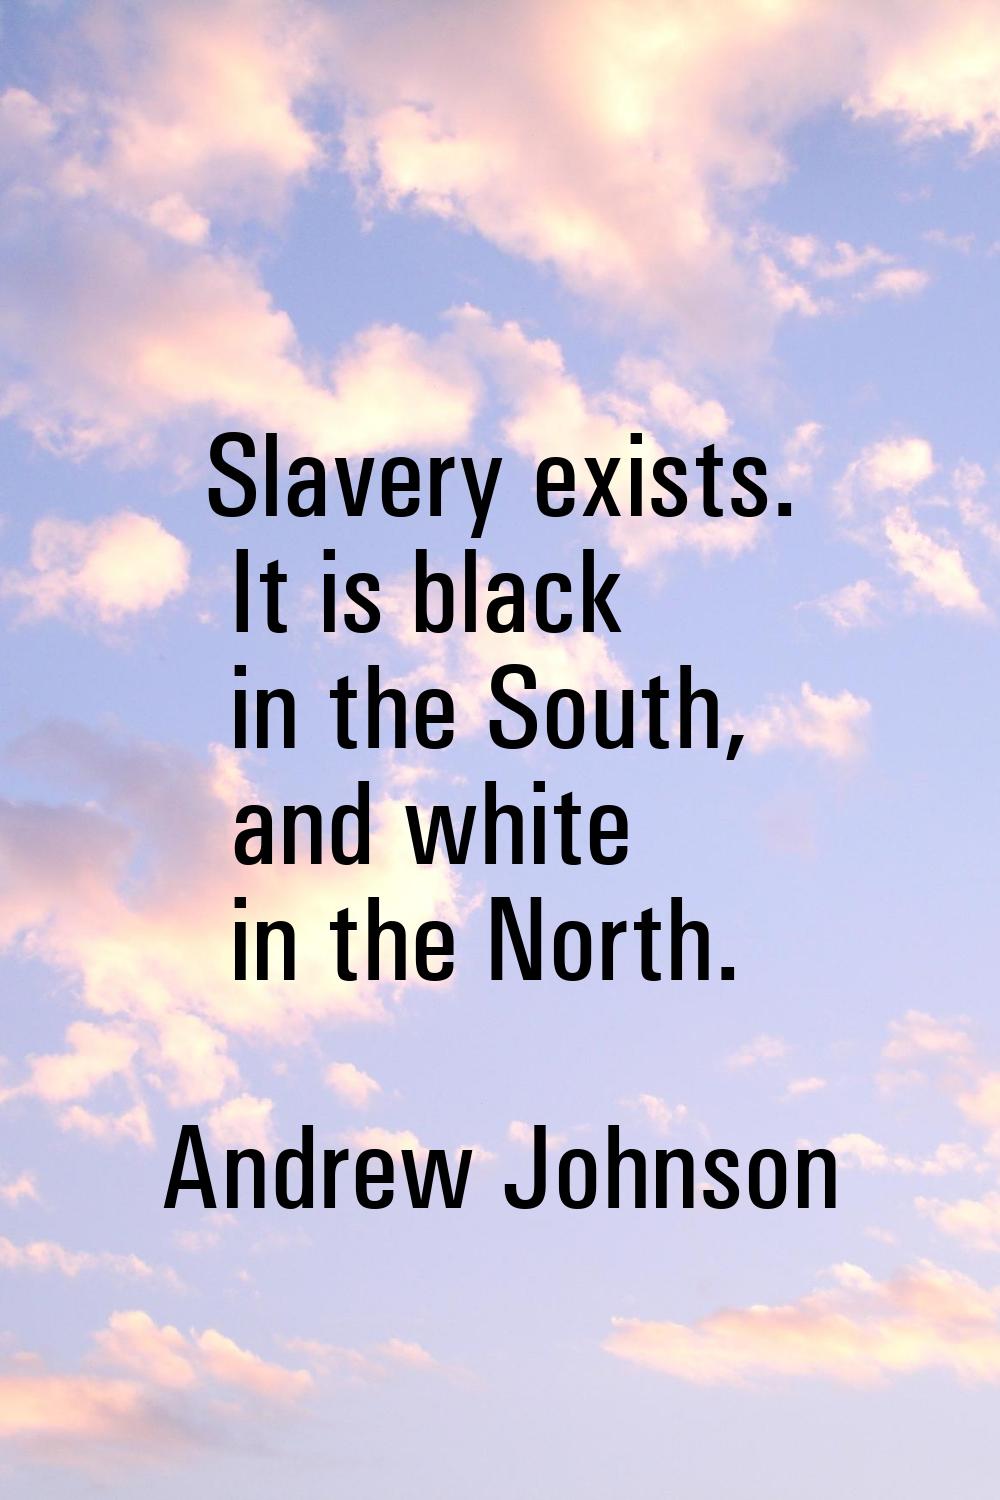 Slavery exists. It is black in the South, and white in the North.